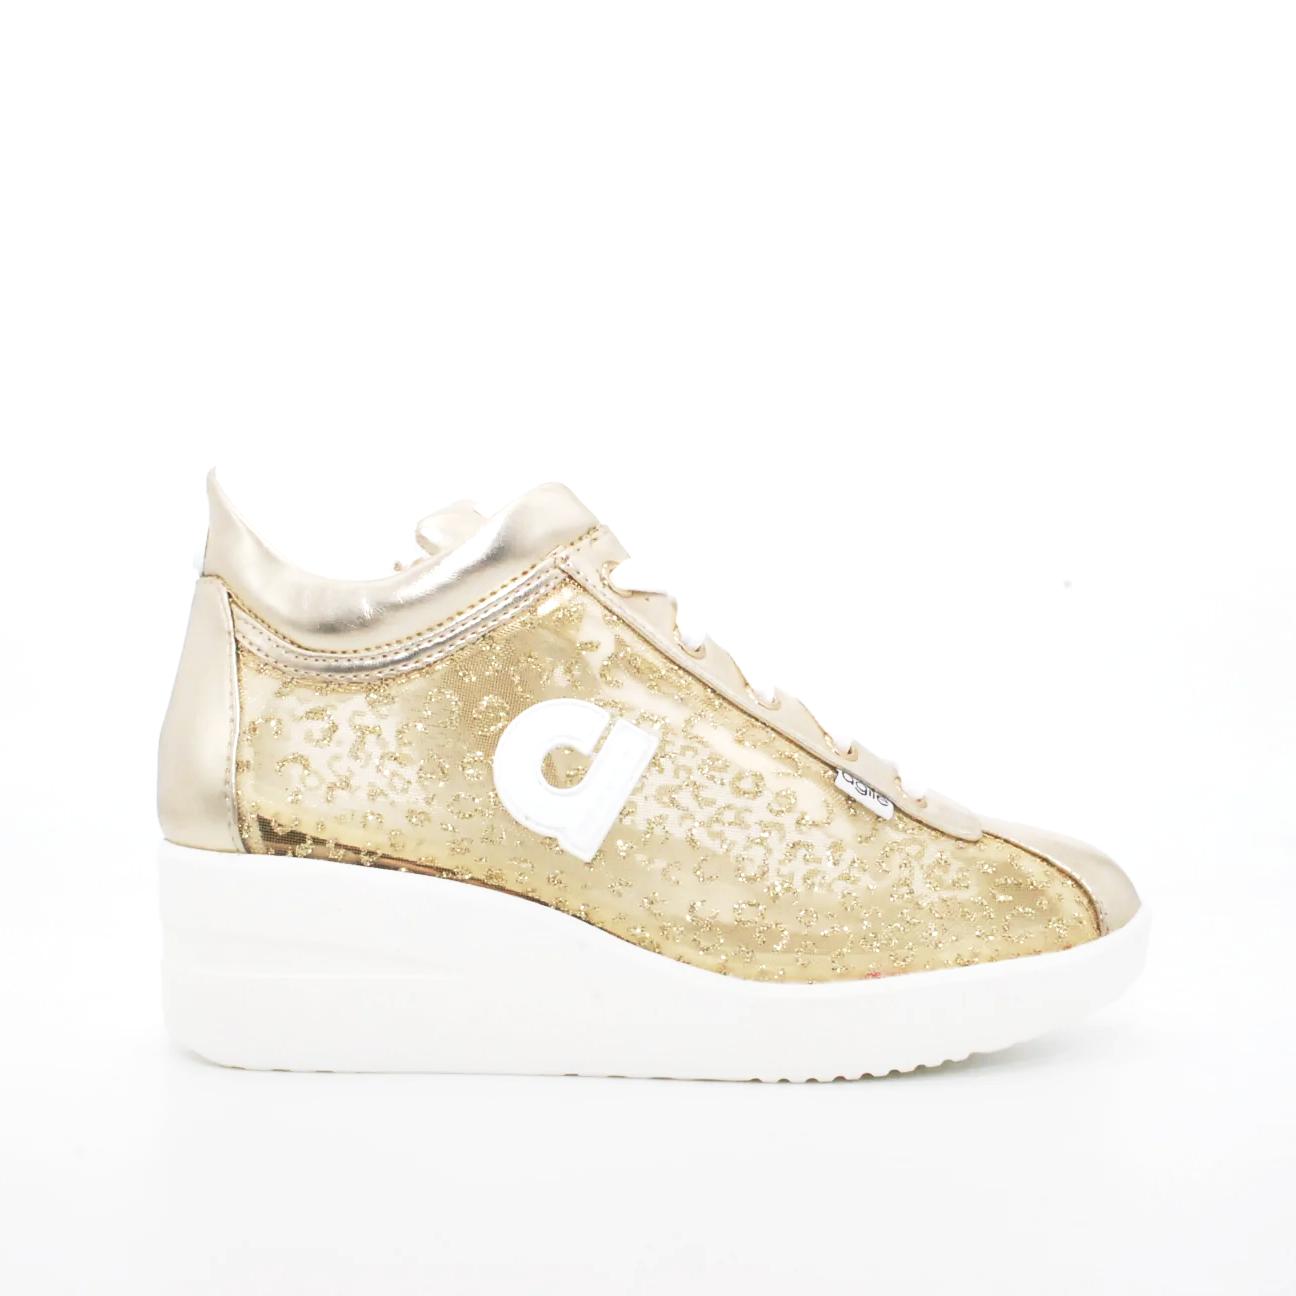 sneakers-agile-by-rucoline-35-oro-tessuto-sneakers.png